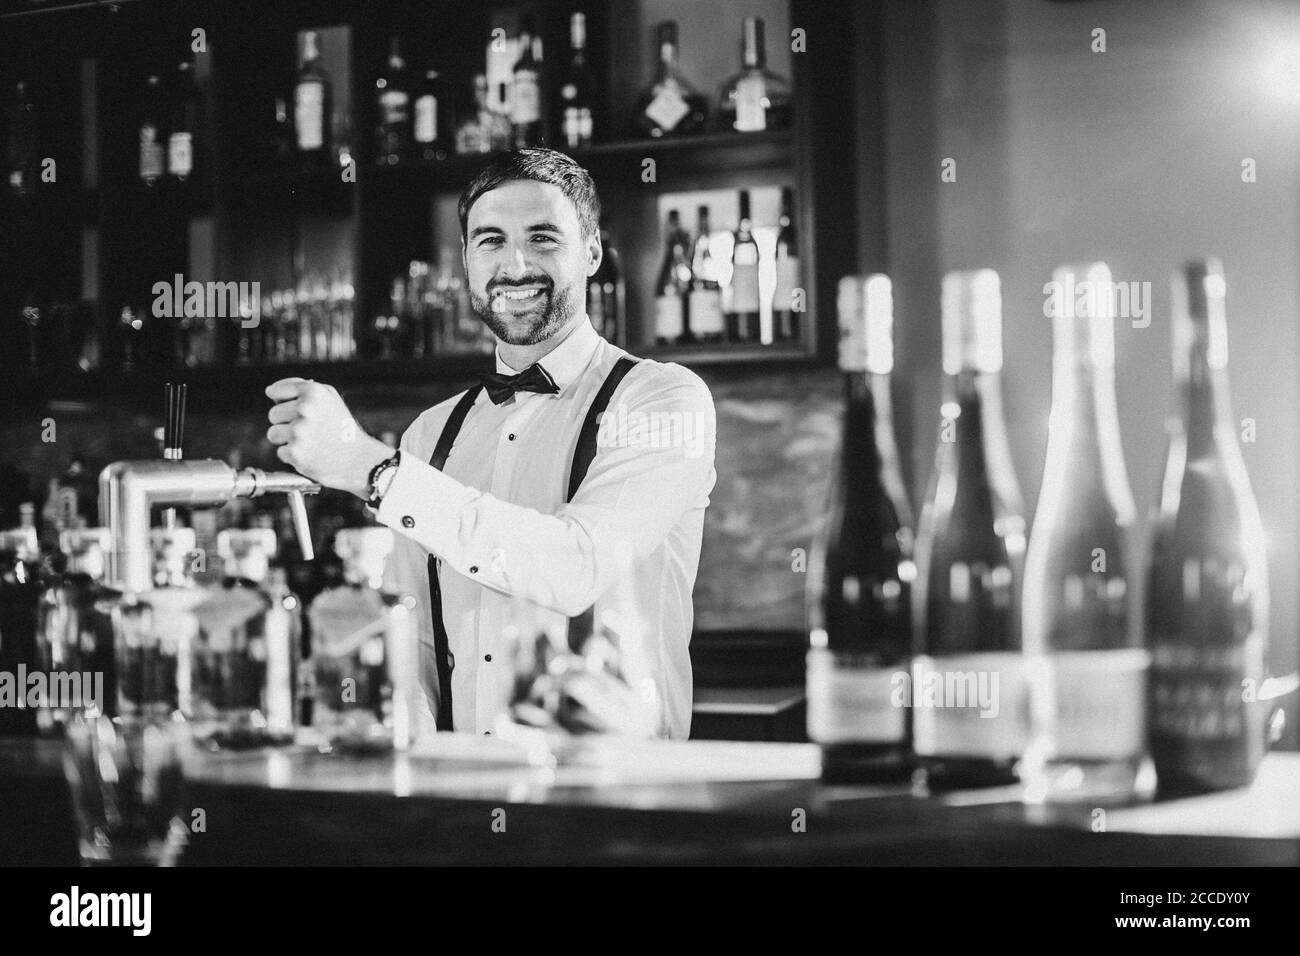 Bartender, suspenders, bow tie, smiling, looking at camera Stock Photo